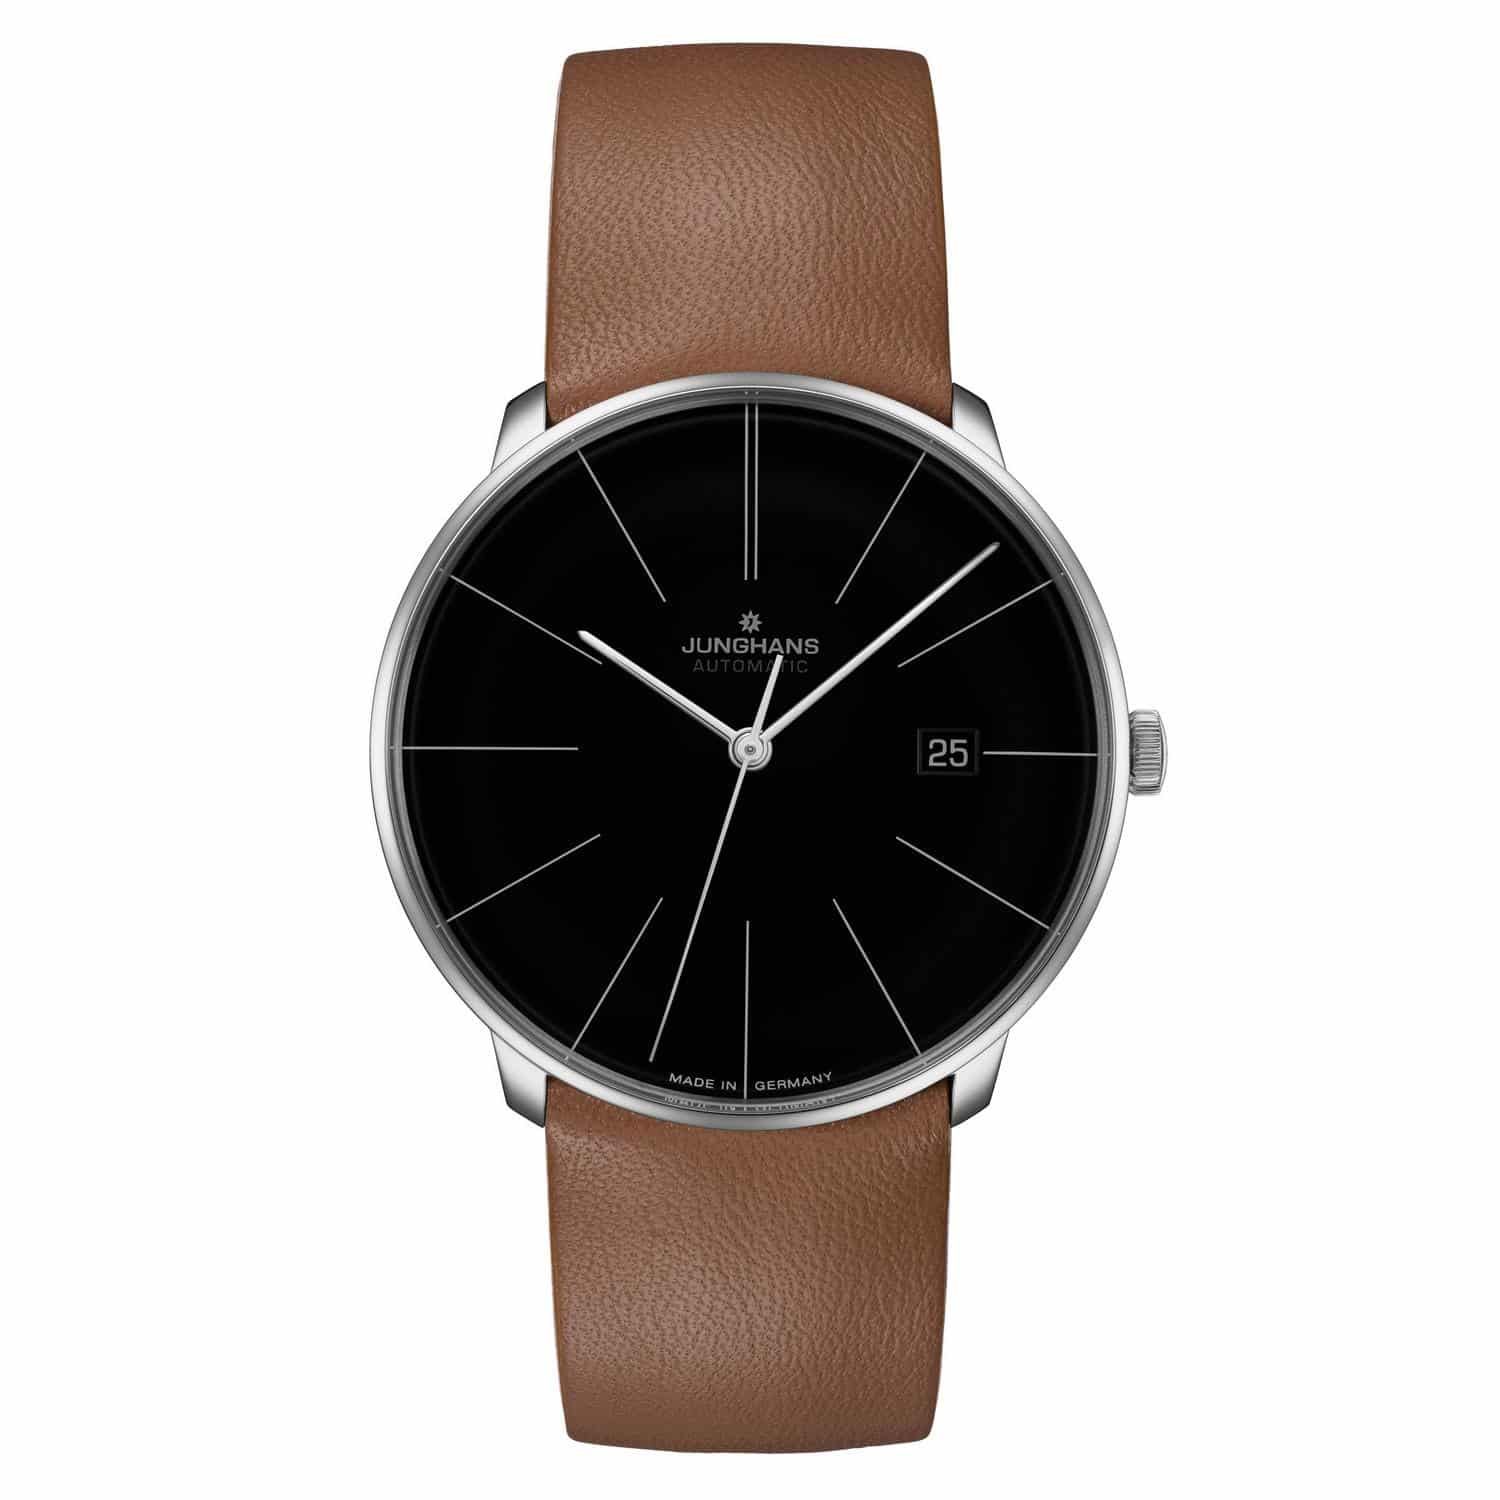 JUNGHANS MEISTER FEIN AUTOMATIC - 027-4154-00